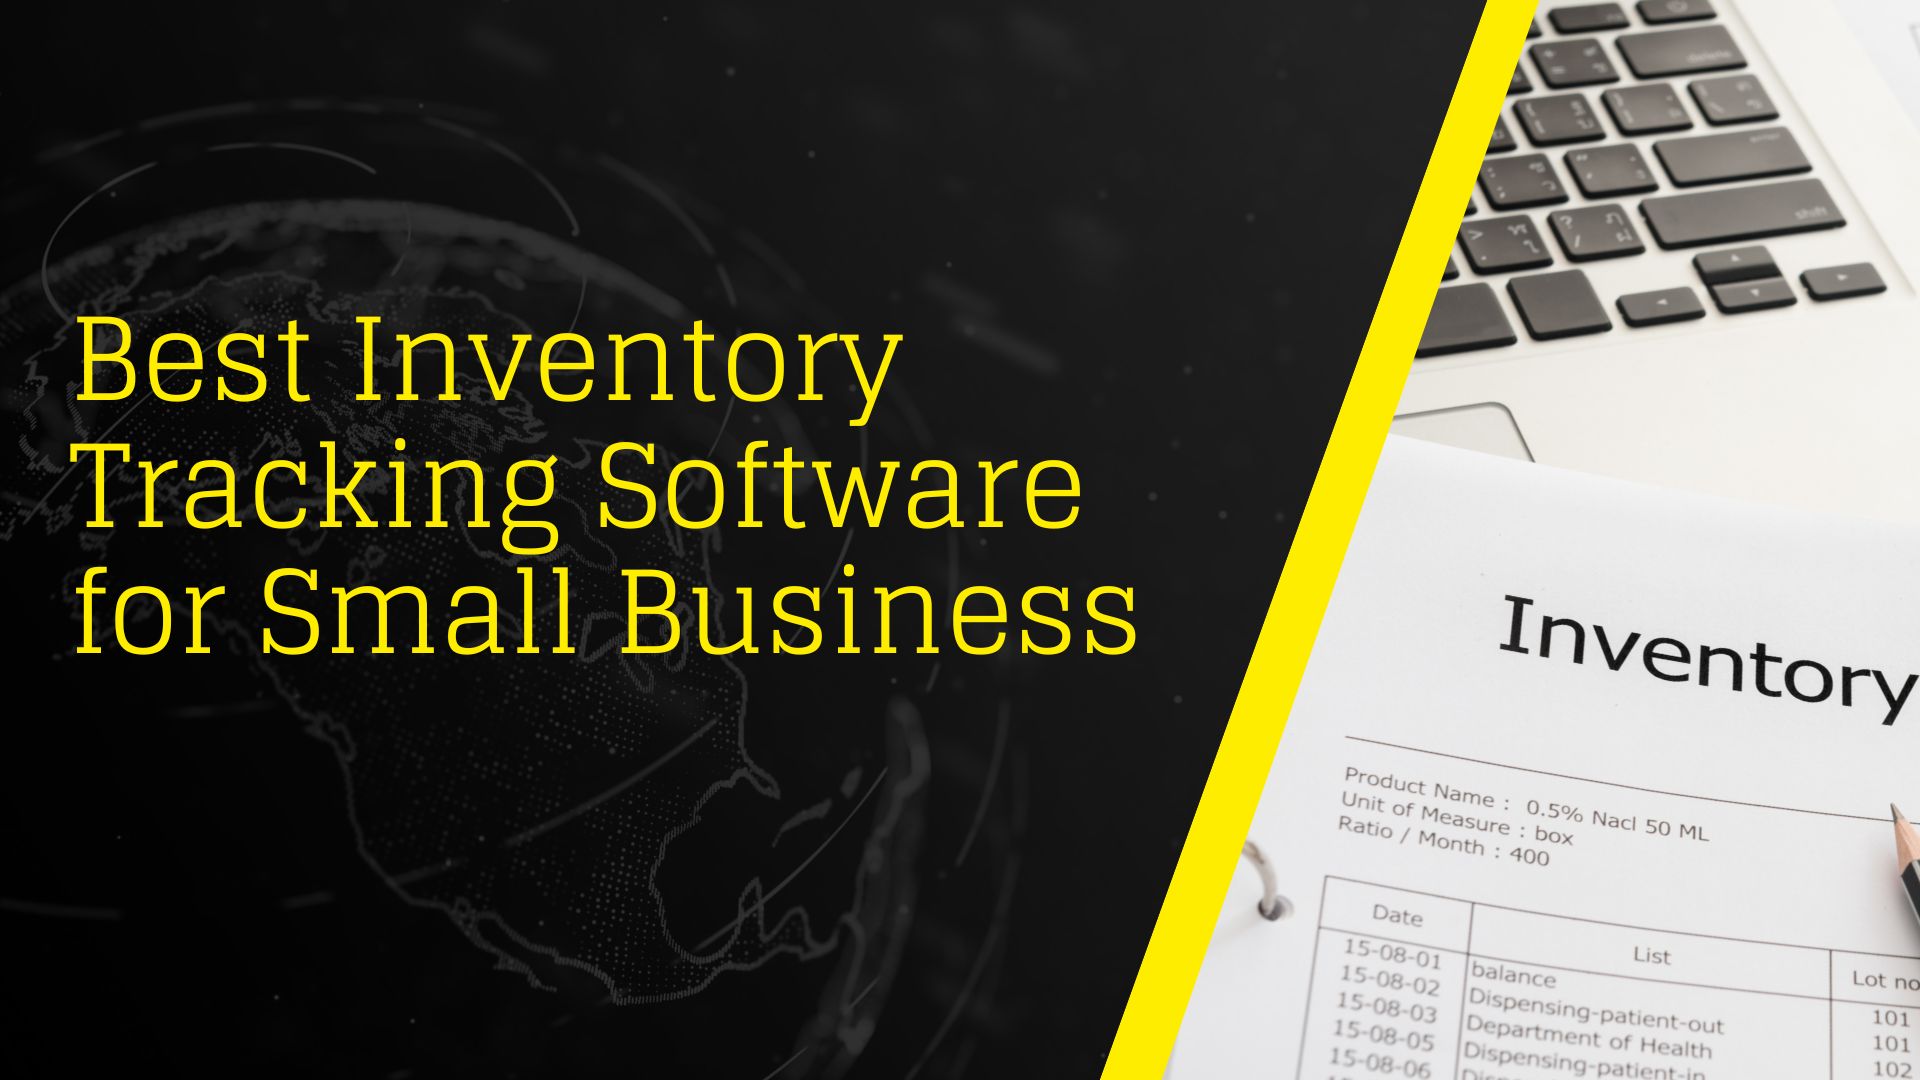 Best Inventory Tracking Software for Small Business